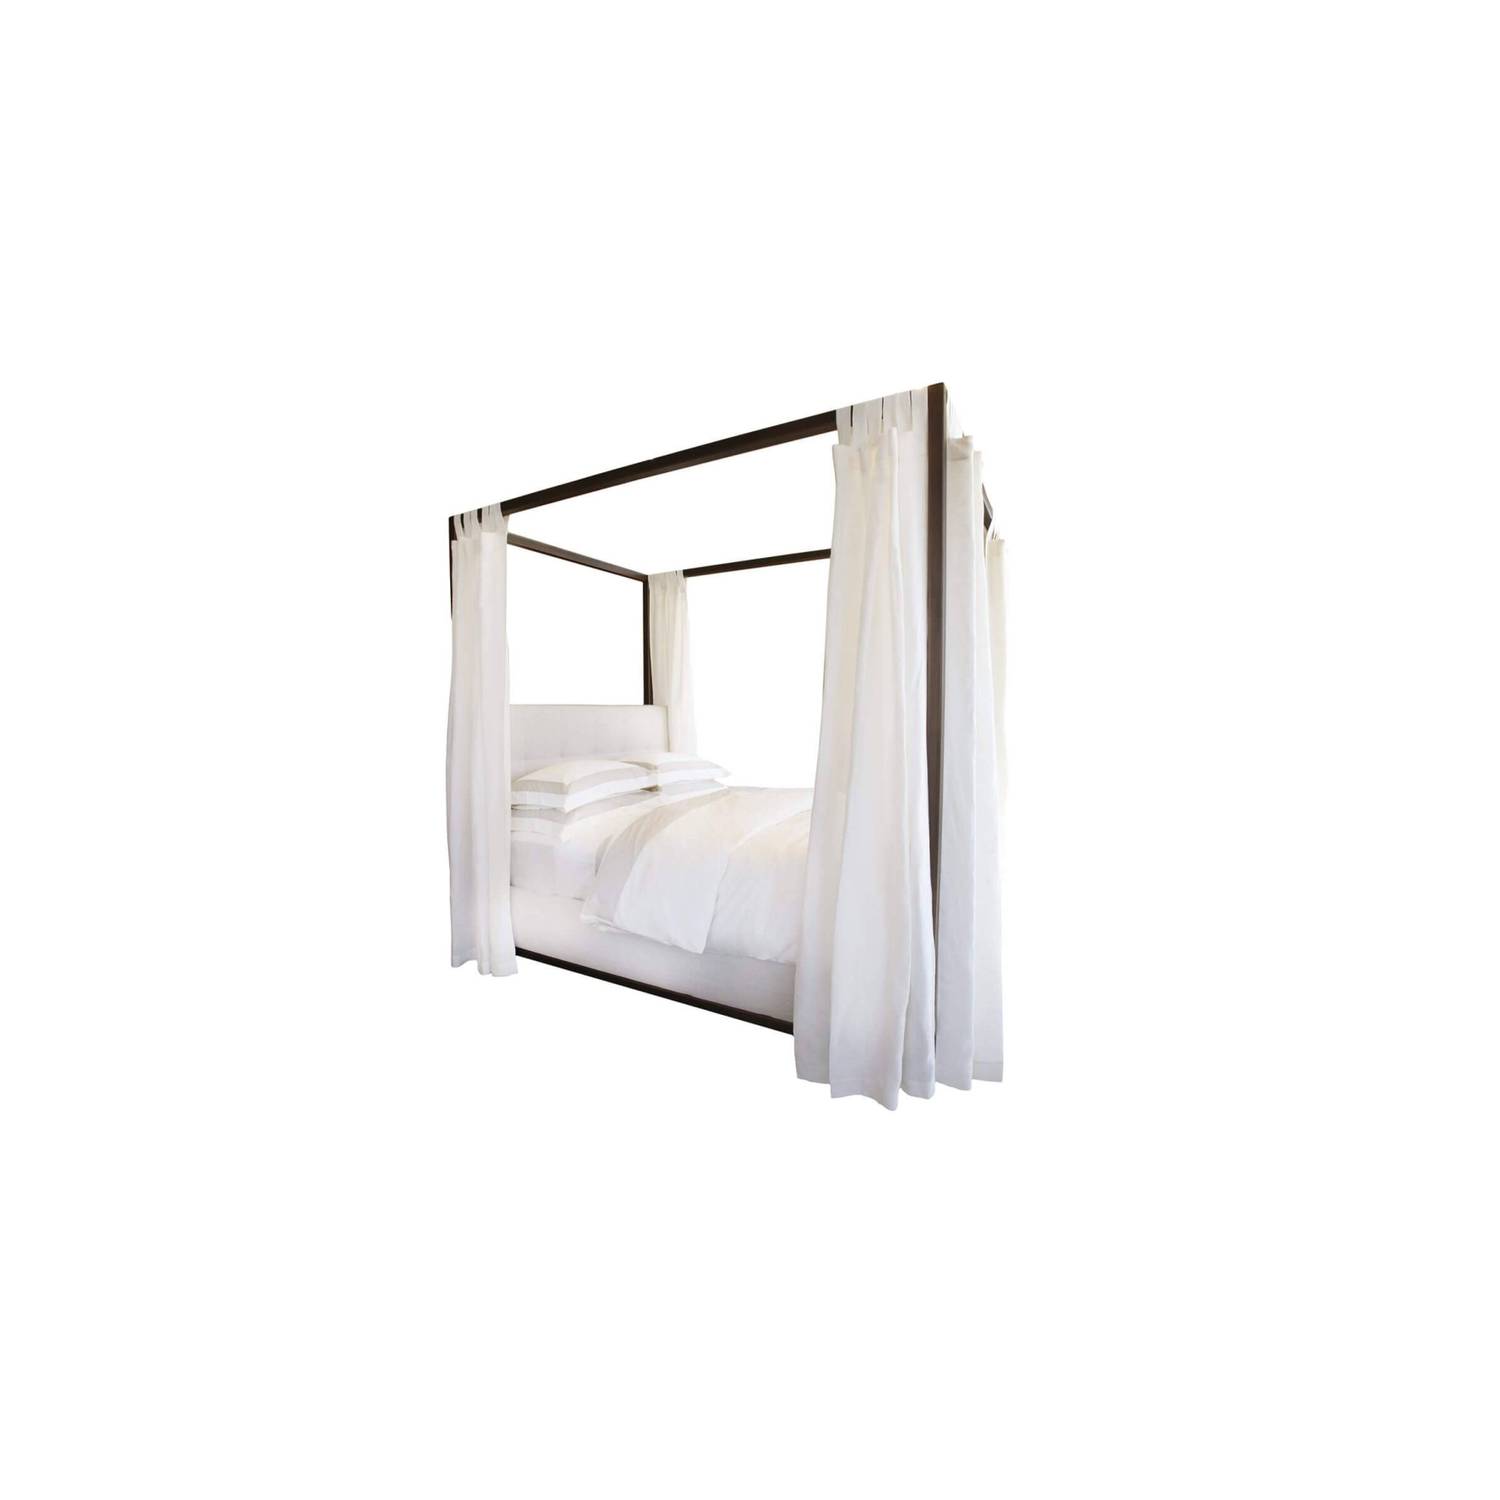 Hollywood Bed Kreiss, Stanley Canopy Bed King